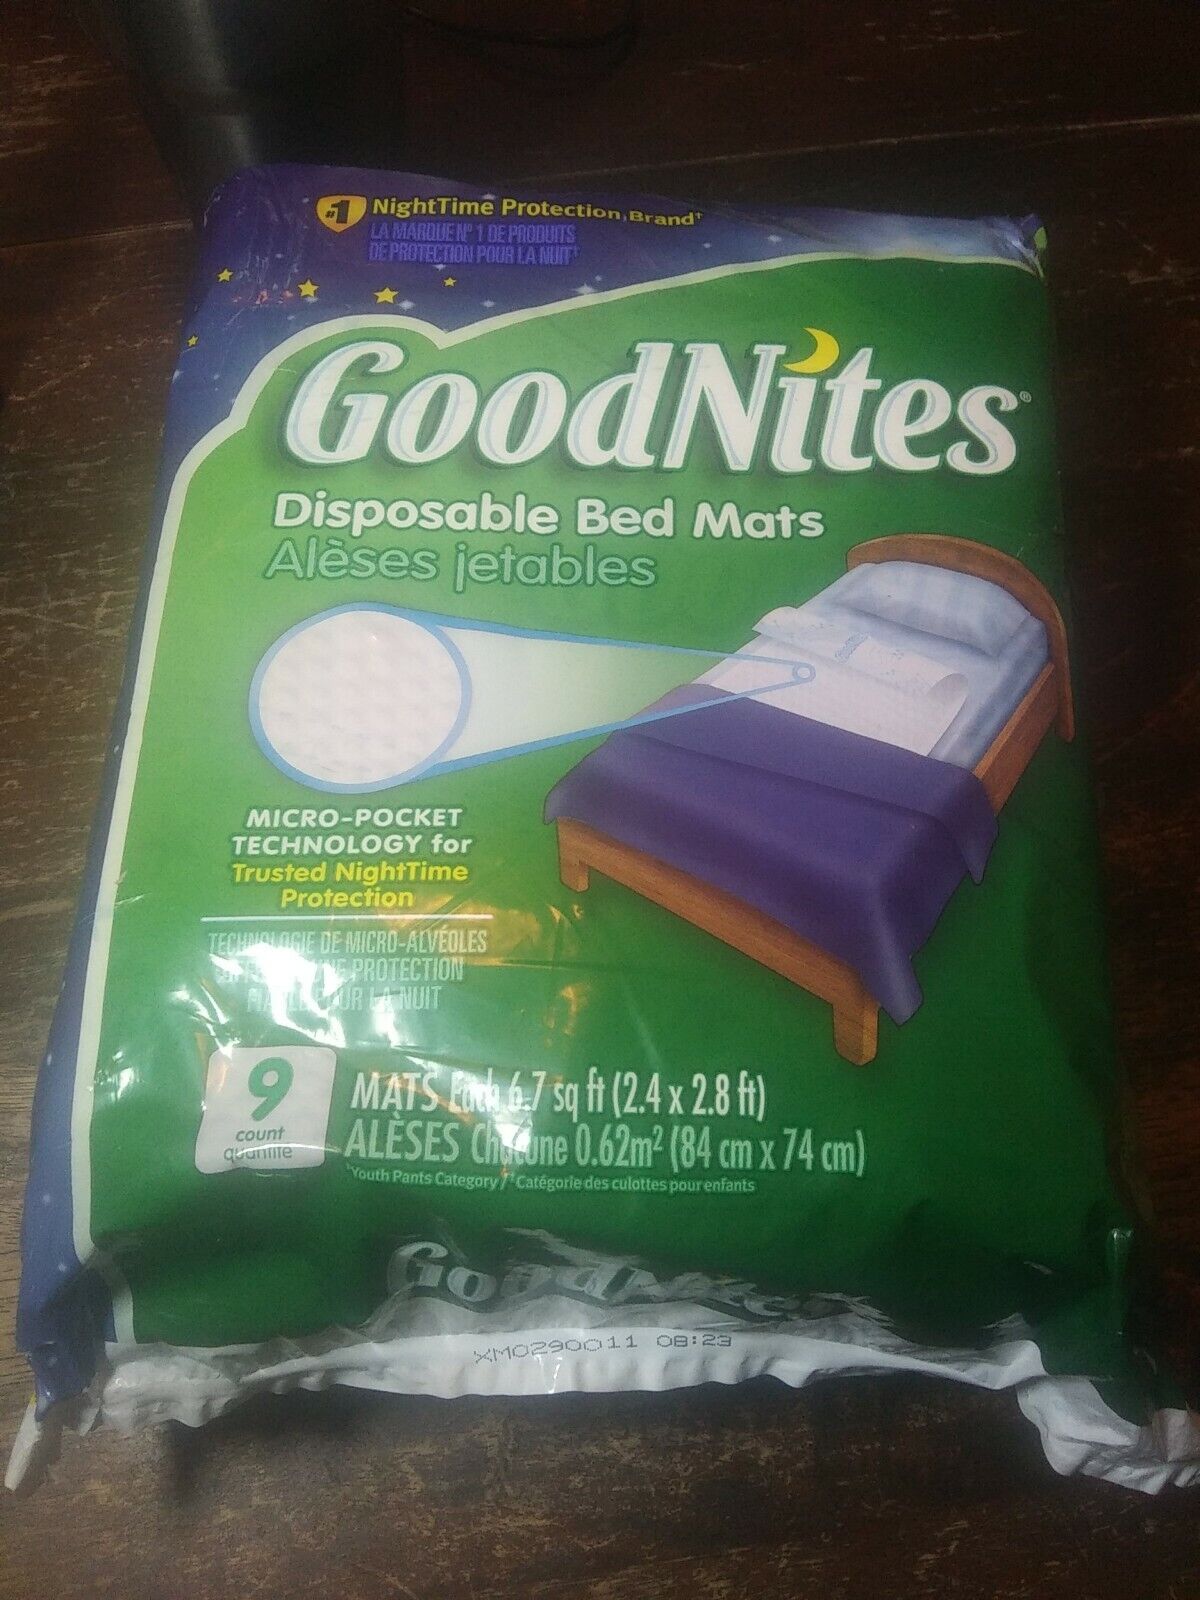 Goodnites 32519 Disposable Bed Mats - 9 Piece 2.4ft X 2.8ft